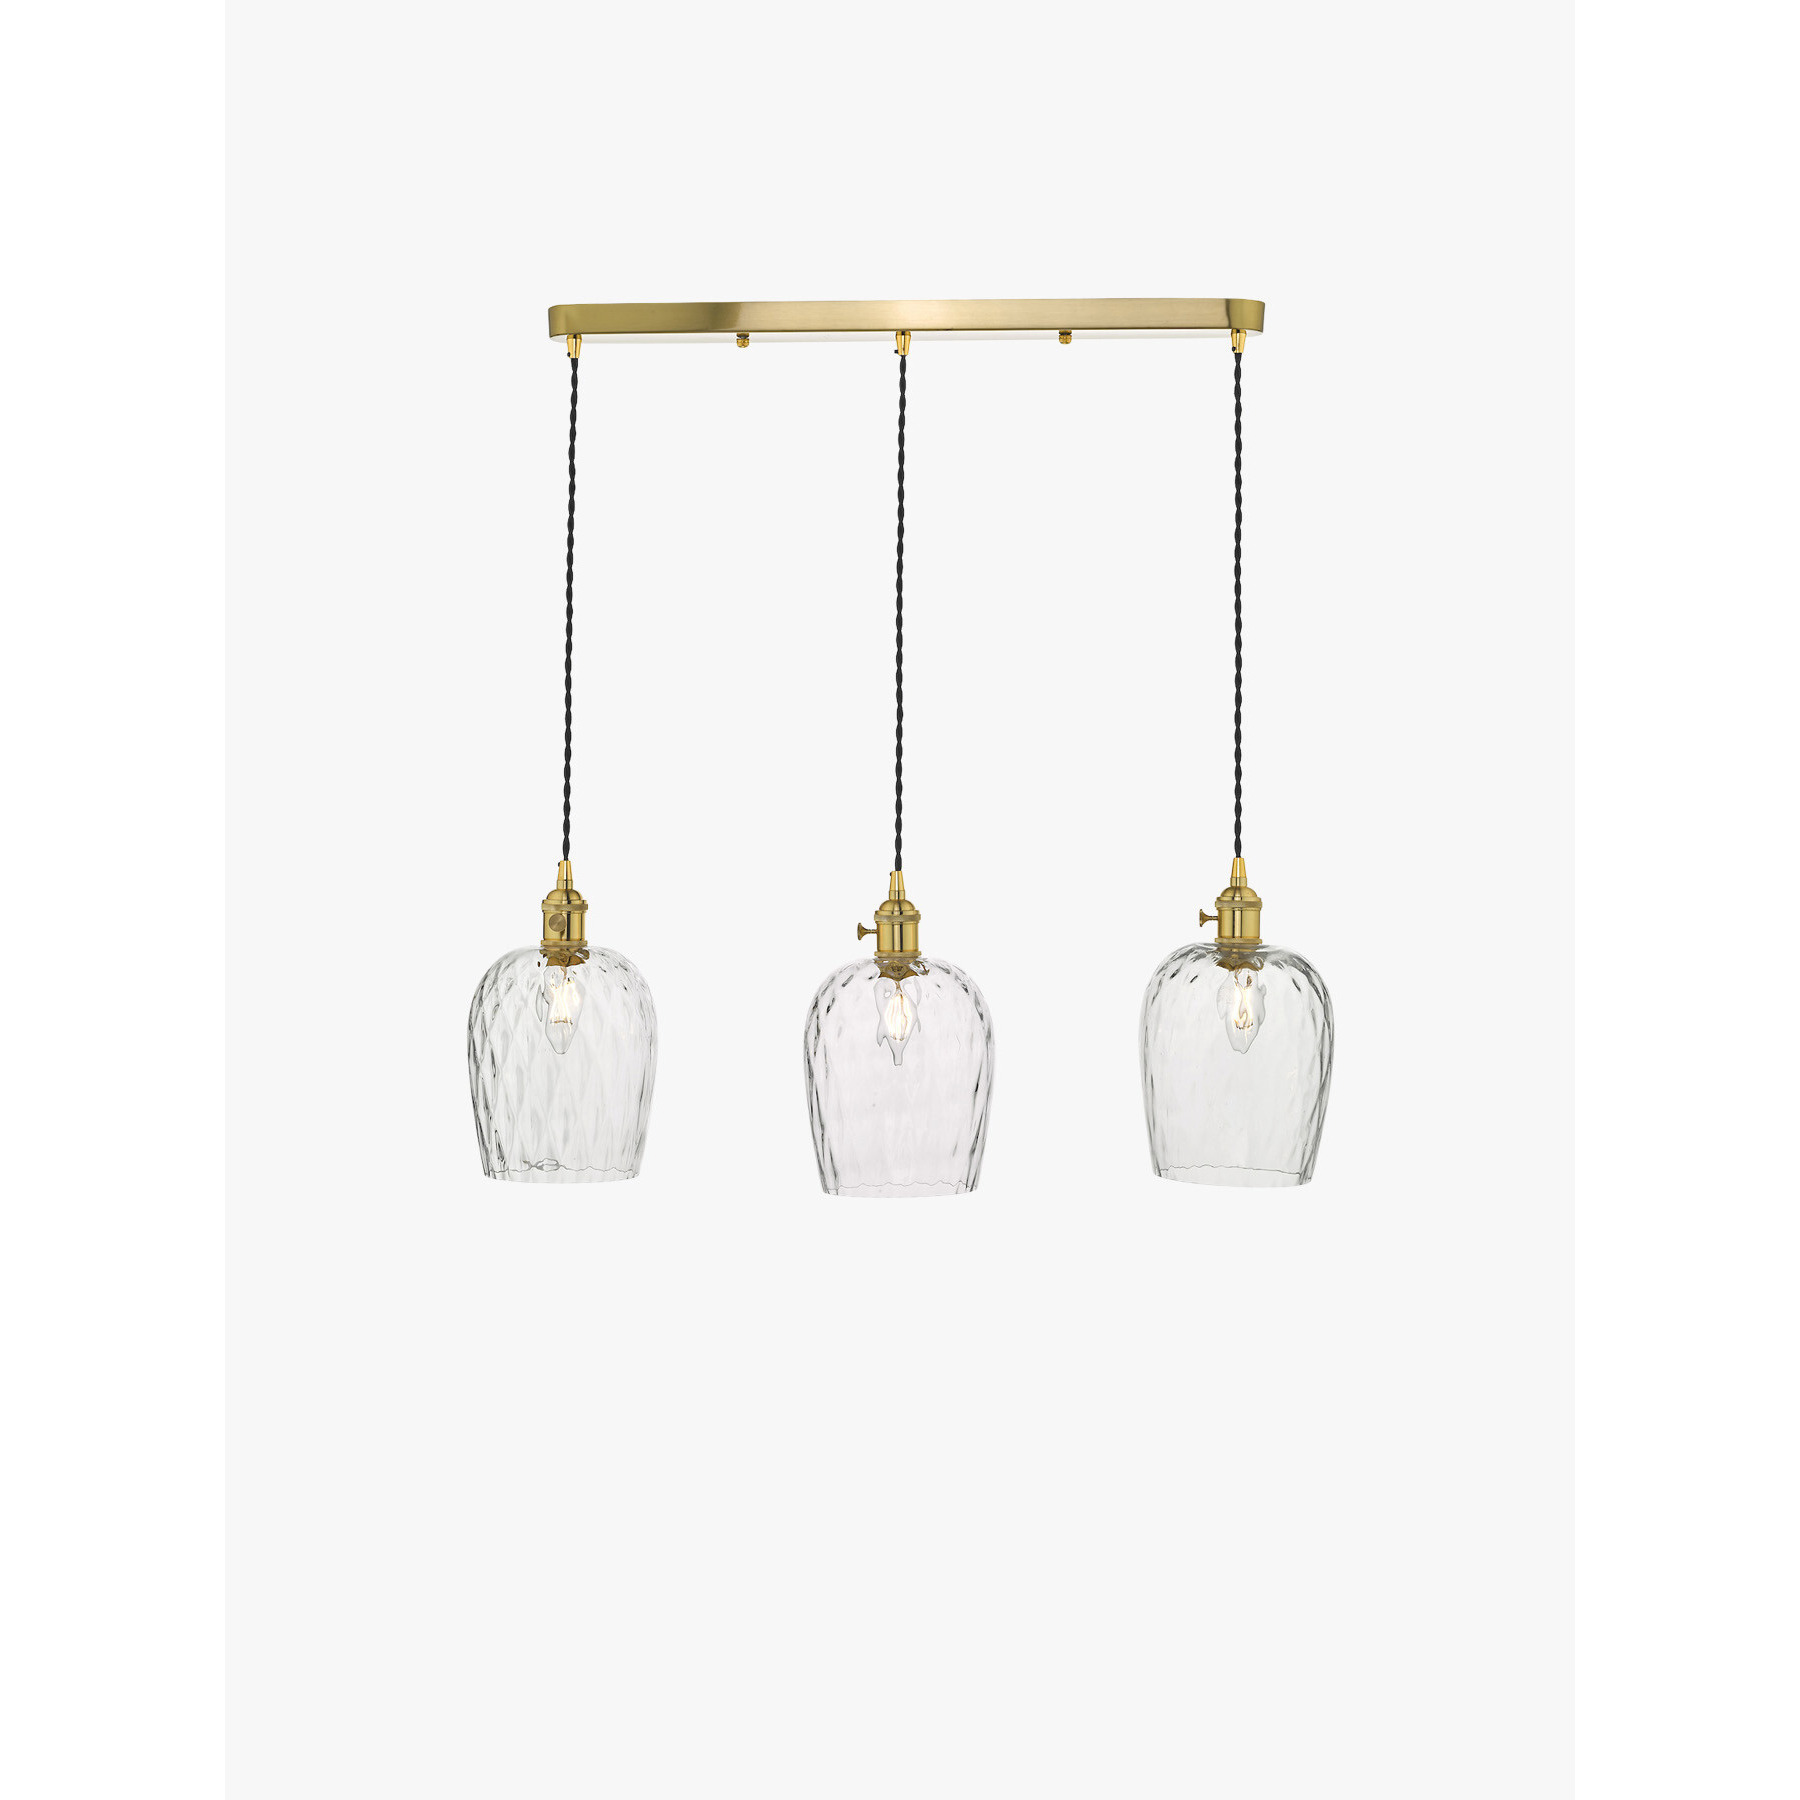 Dar Lighting Hadano 3 Light Brass Suspension with Dimpled Glass Shades Gold - image 1